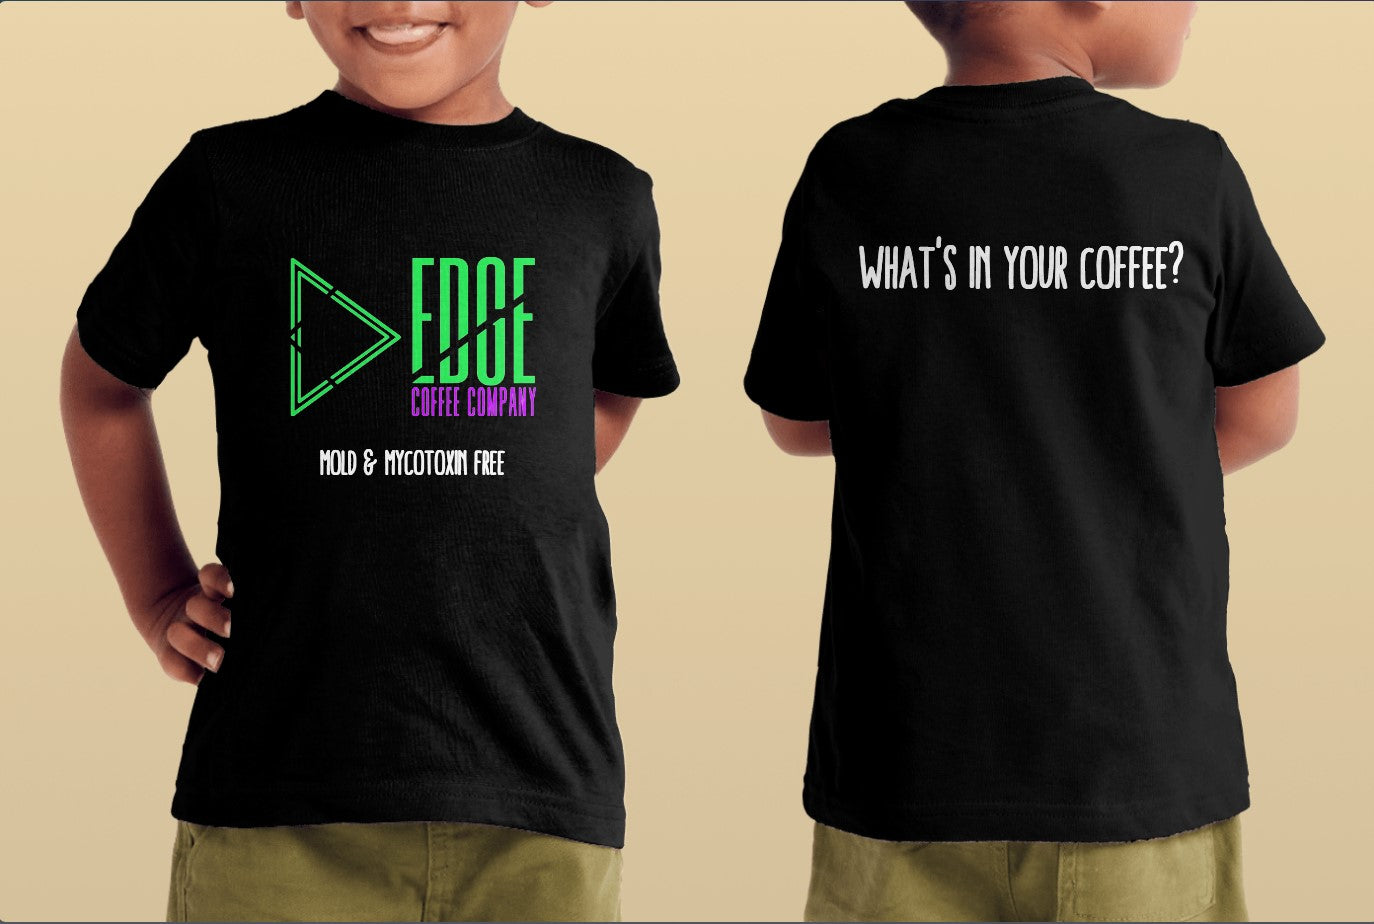 Edge T-Shirt - What's in your coffee?